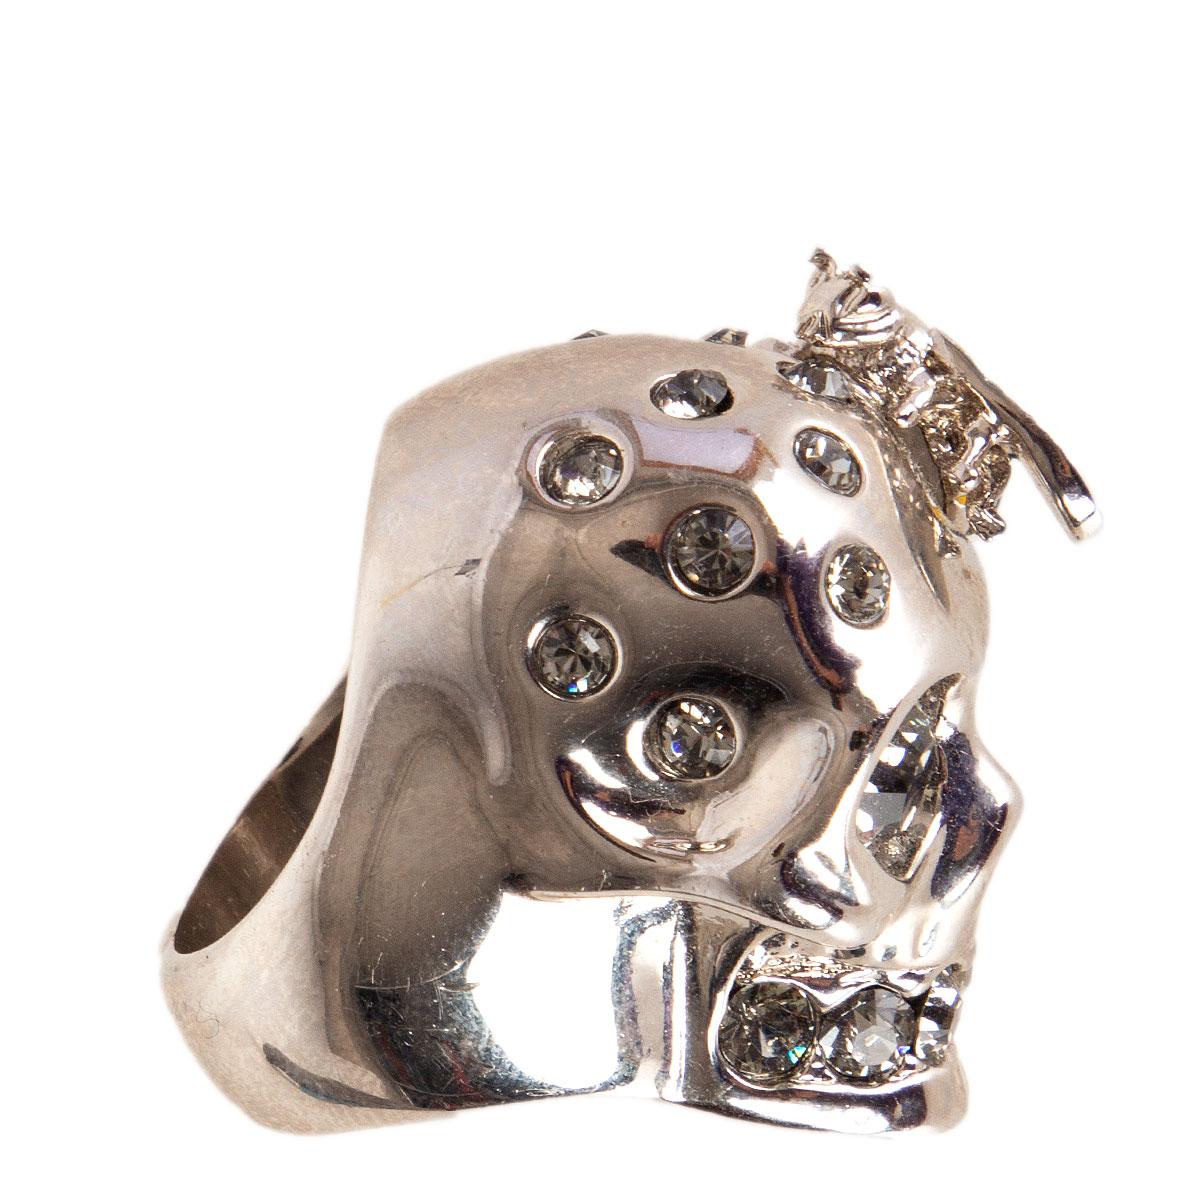 Alexander McQueen skull ring in silver-tone brass with crystal details and enameled bee. Has been worn and is in excellent condition.

Tag Size 7
Width 3cm (1.2in)
Length 2.5cm (1in)